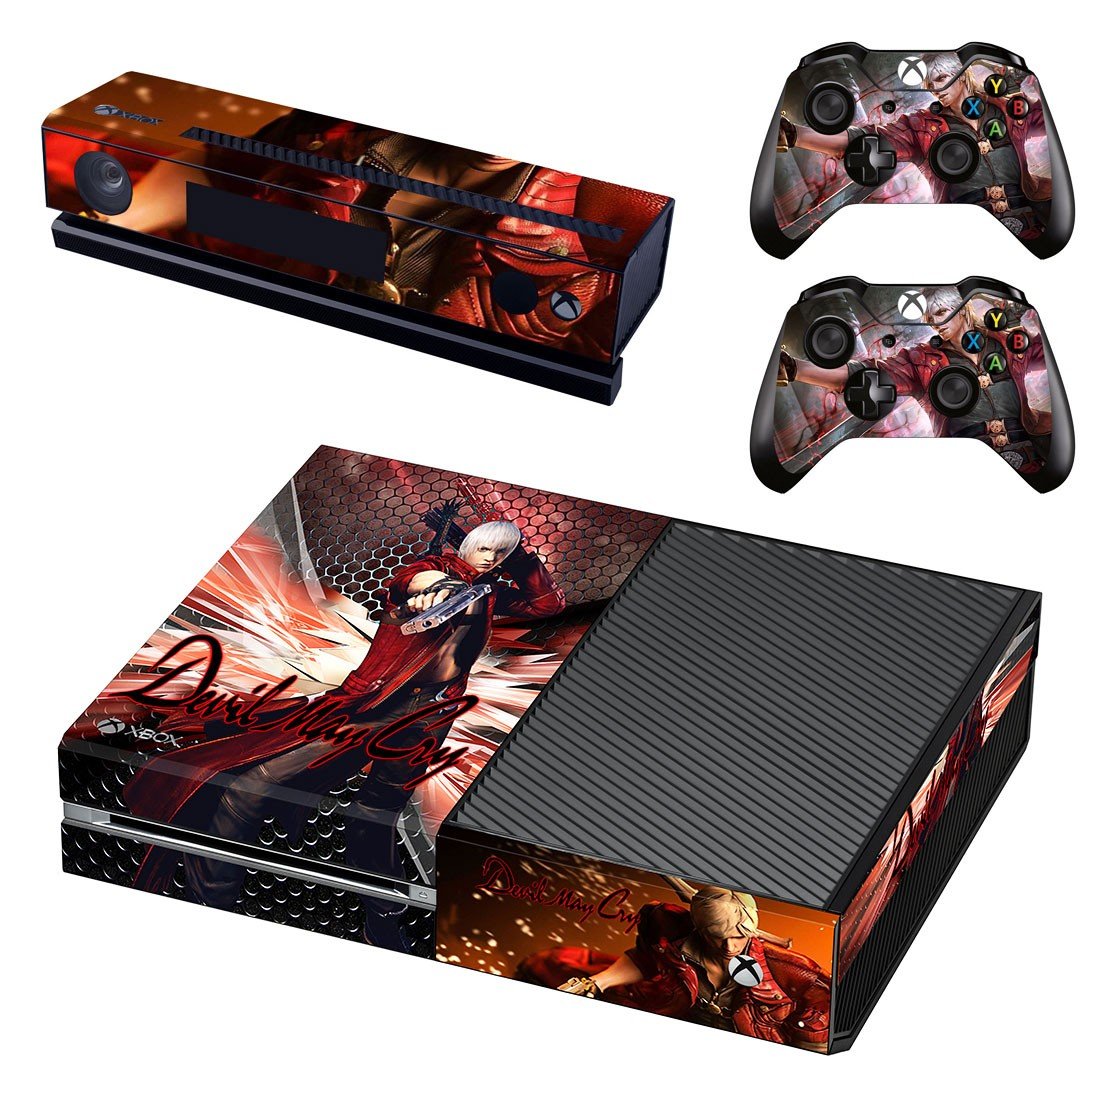 Xbox One And Controllers Skin Cover Devil May Cry 5 Design 1